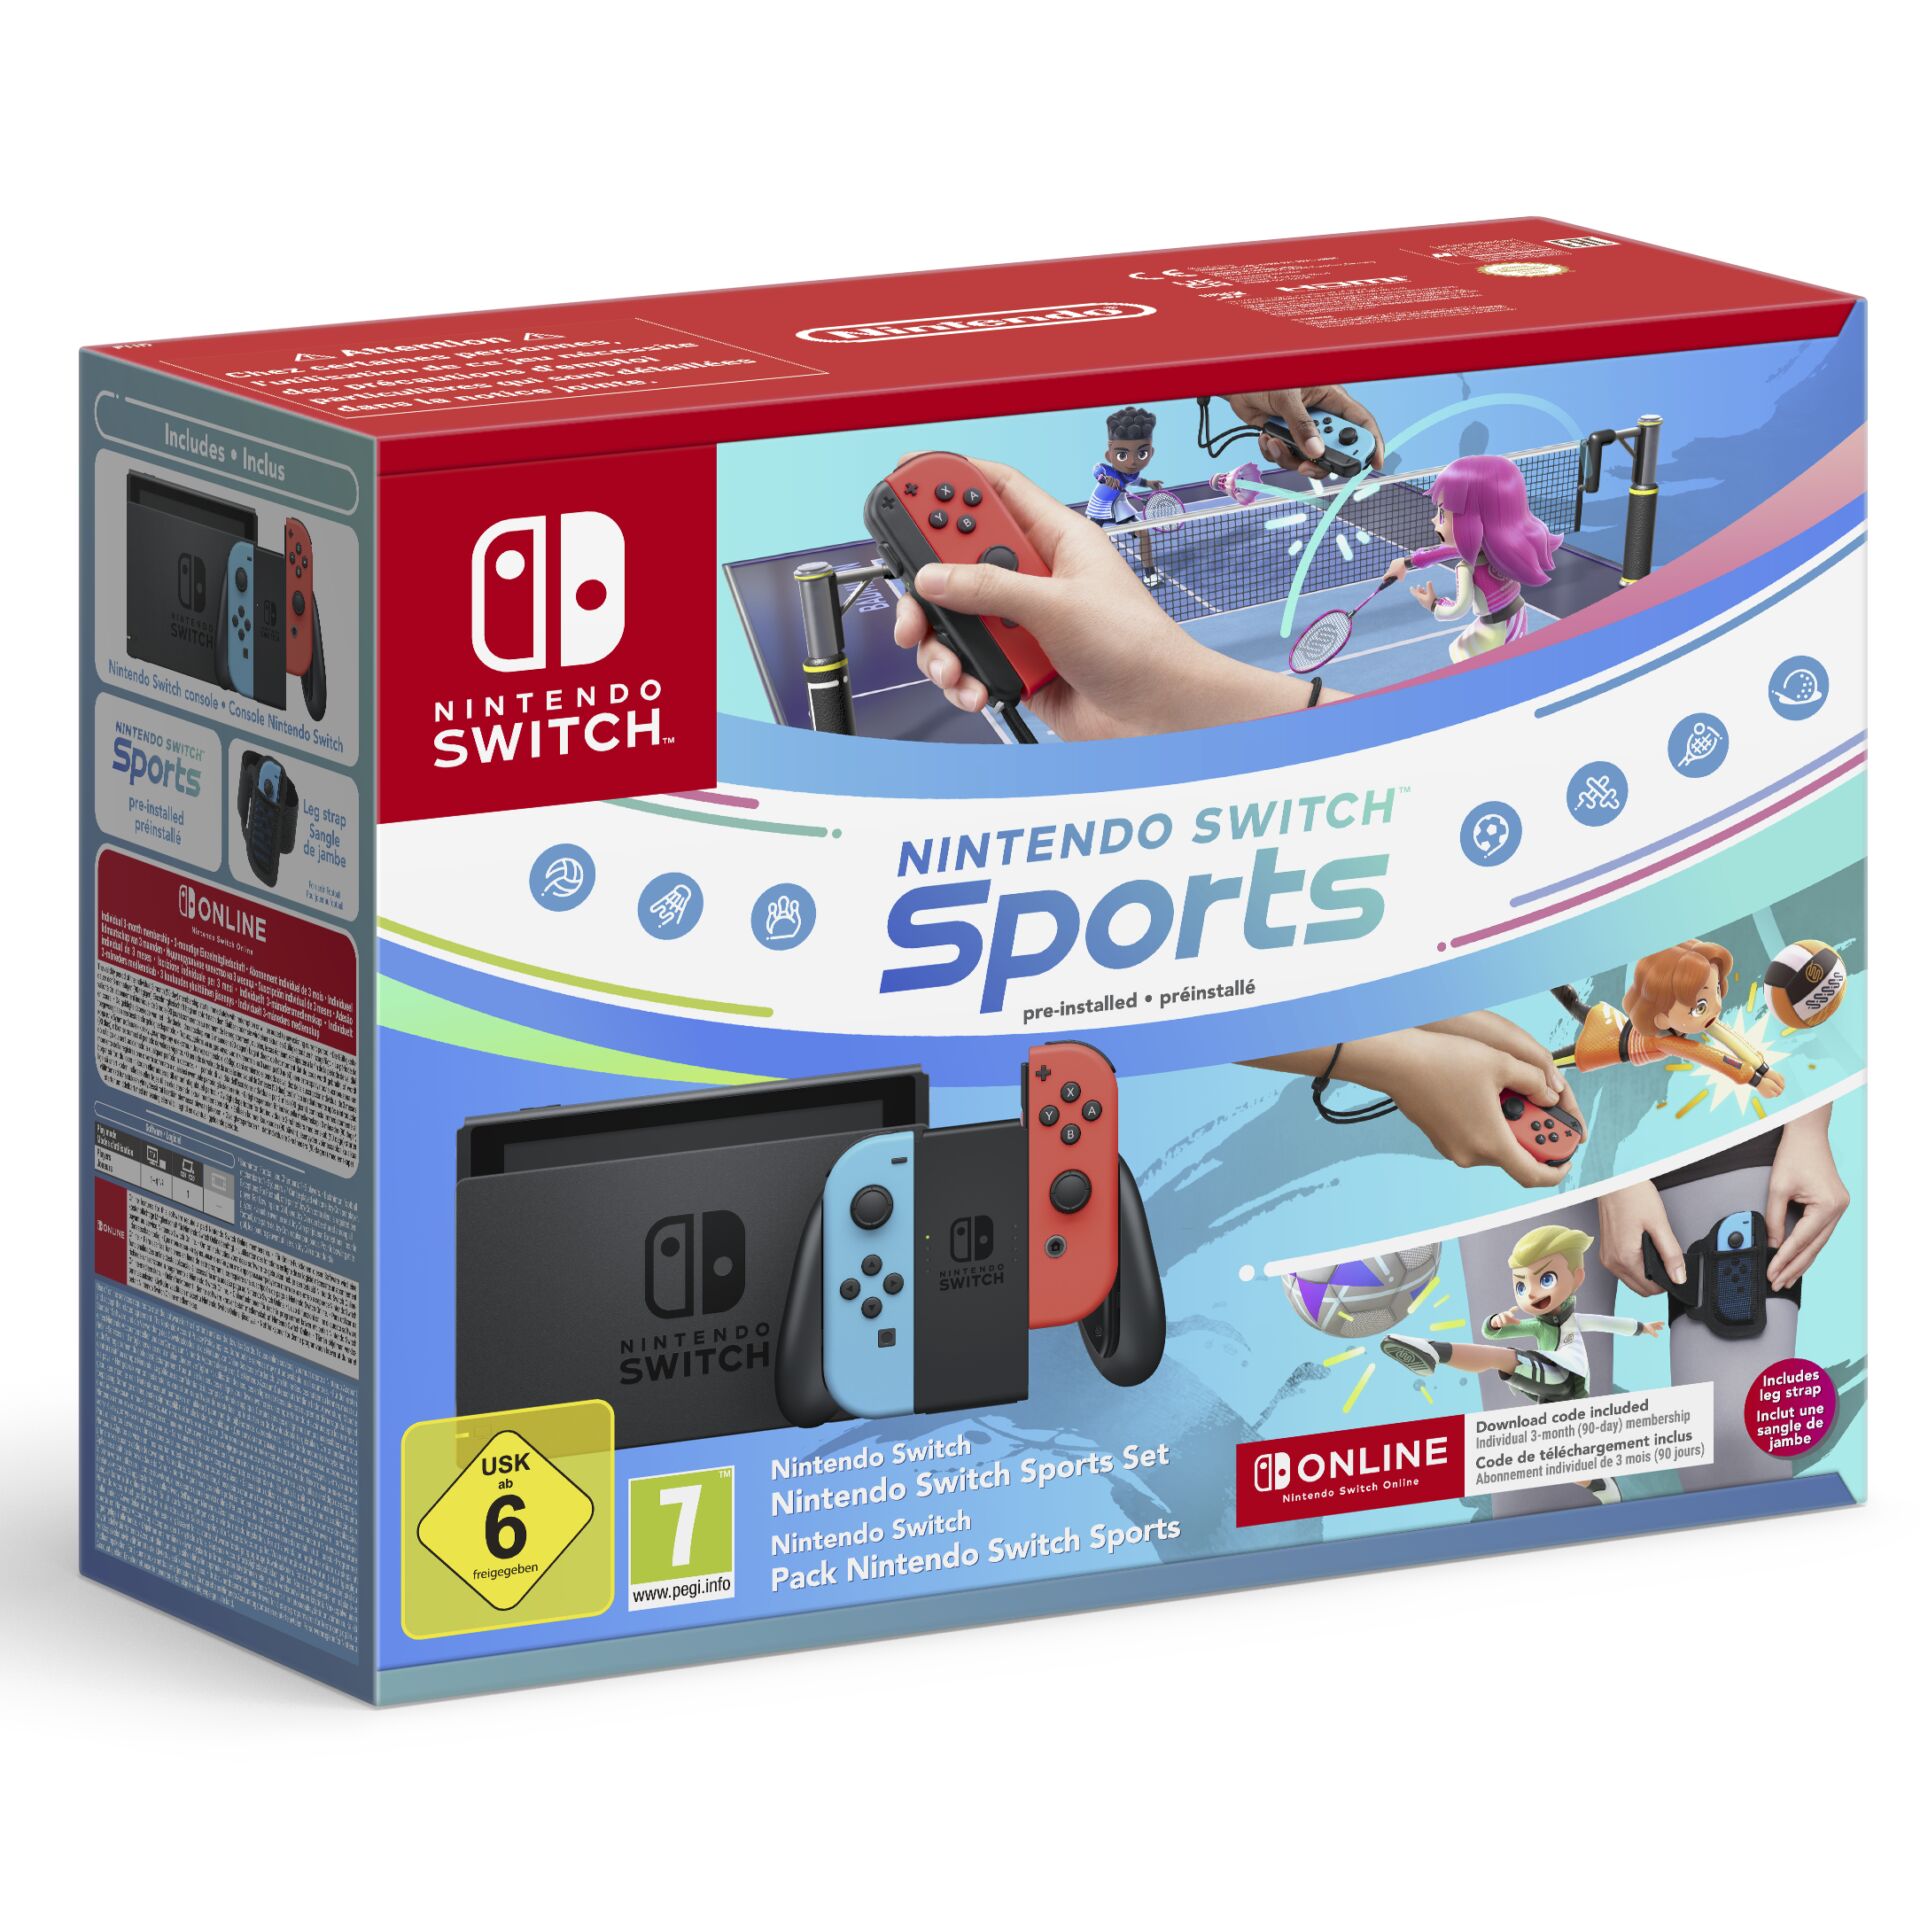 Nintendo Switch Sports Set portable game console 15.8 cm (6.2) 32 GB Touchscreen Wi-Fi Blue, Grey, Red